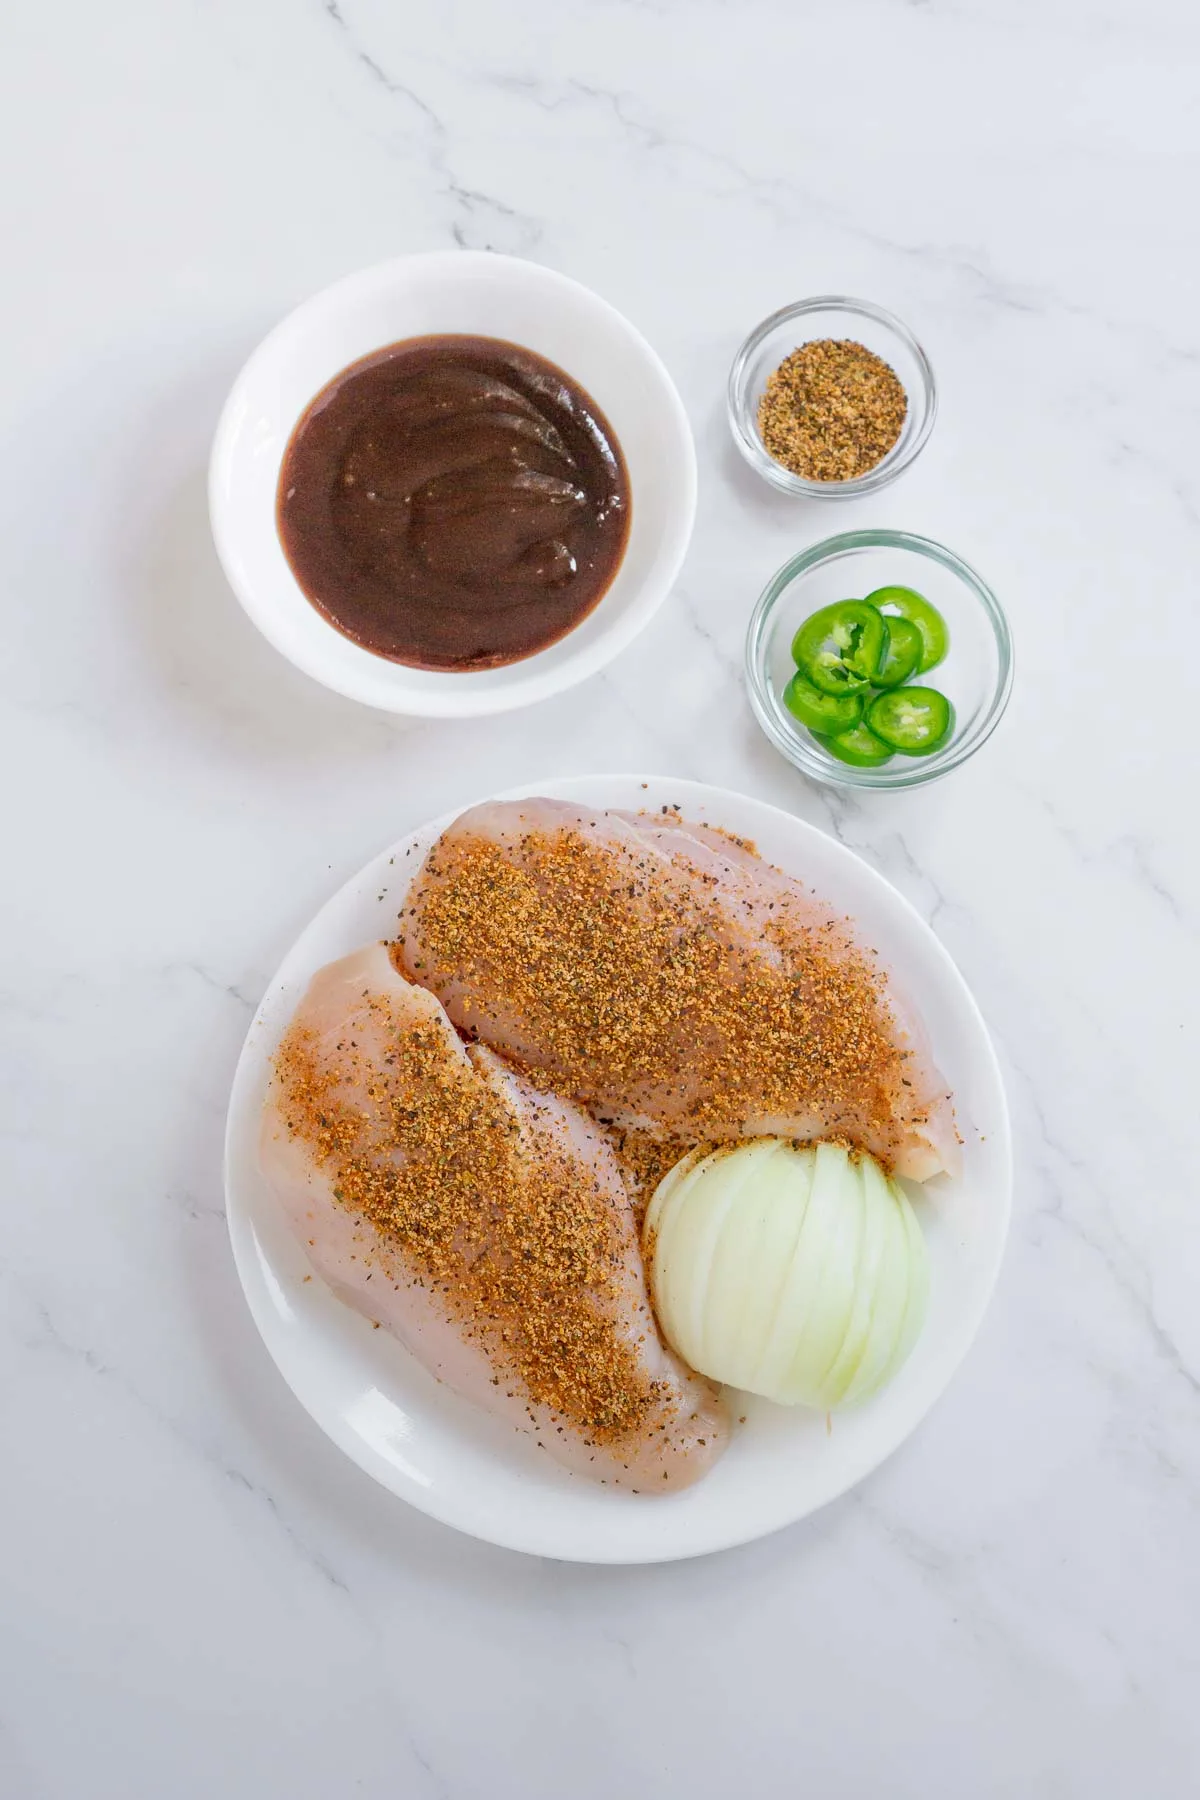 Ingredient to make sous vide shredded chicken: chicken breasts, BBQ sauce, seasoning, onion, and jalapenos.